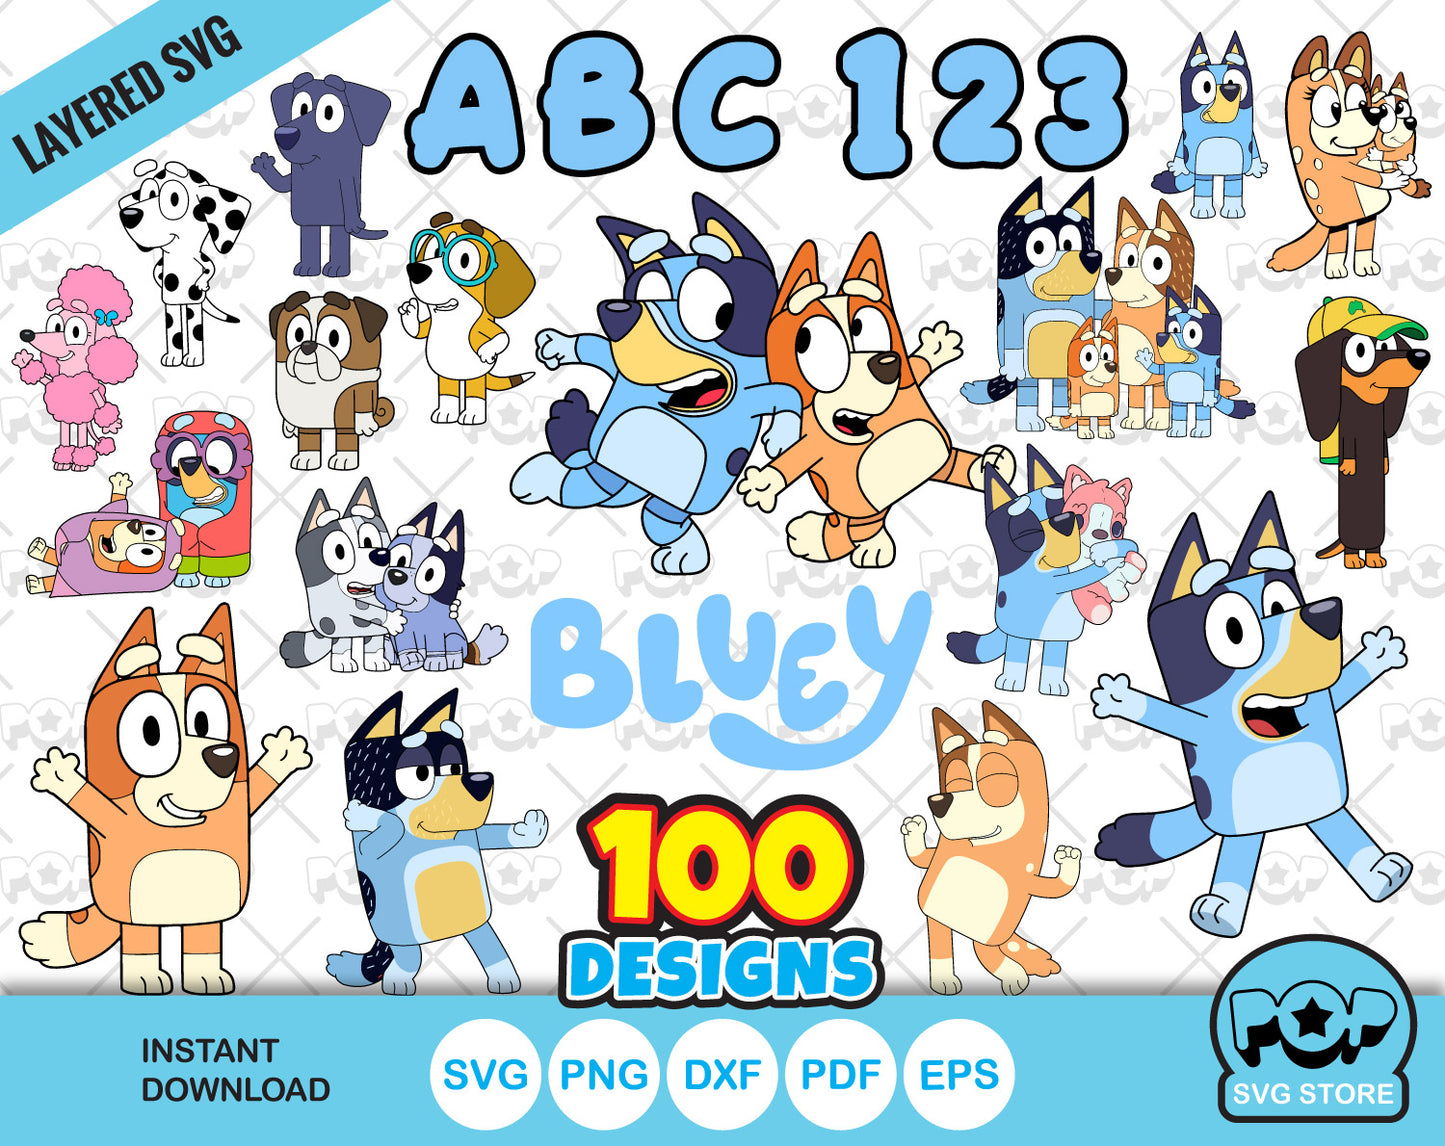 Bluey 100 cliparts bundle, SVG cutting files for cricut silhouette ...